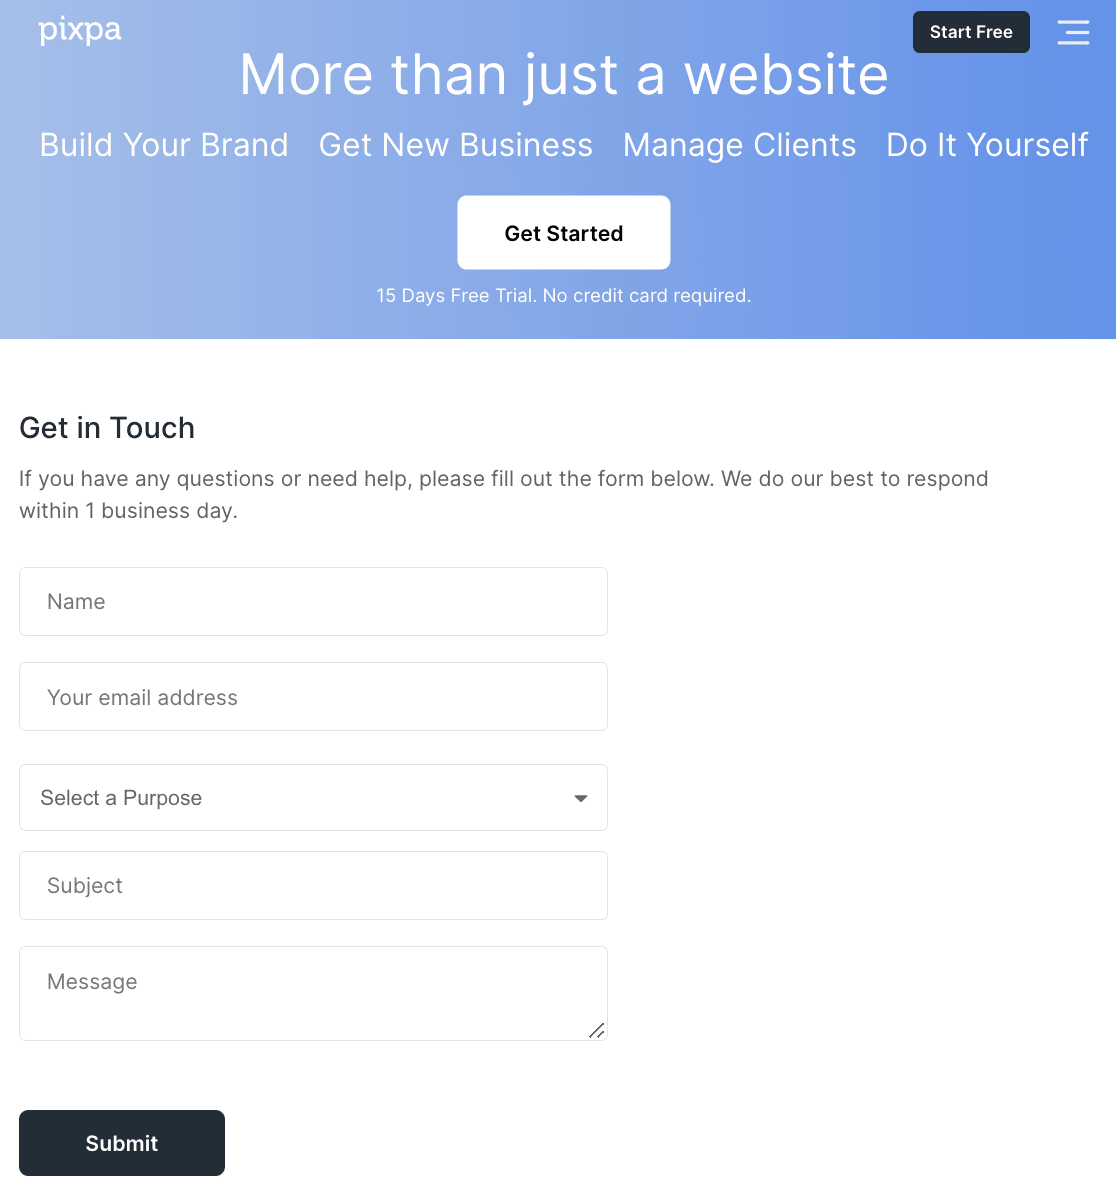 An example of a Contact page form